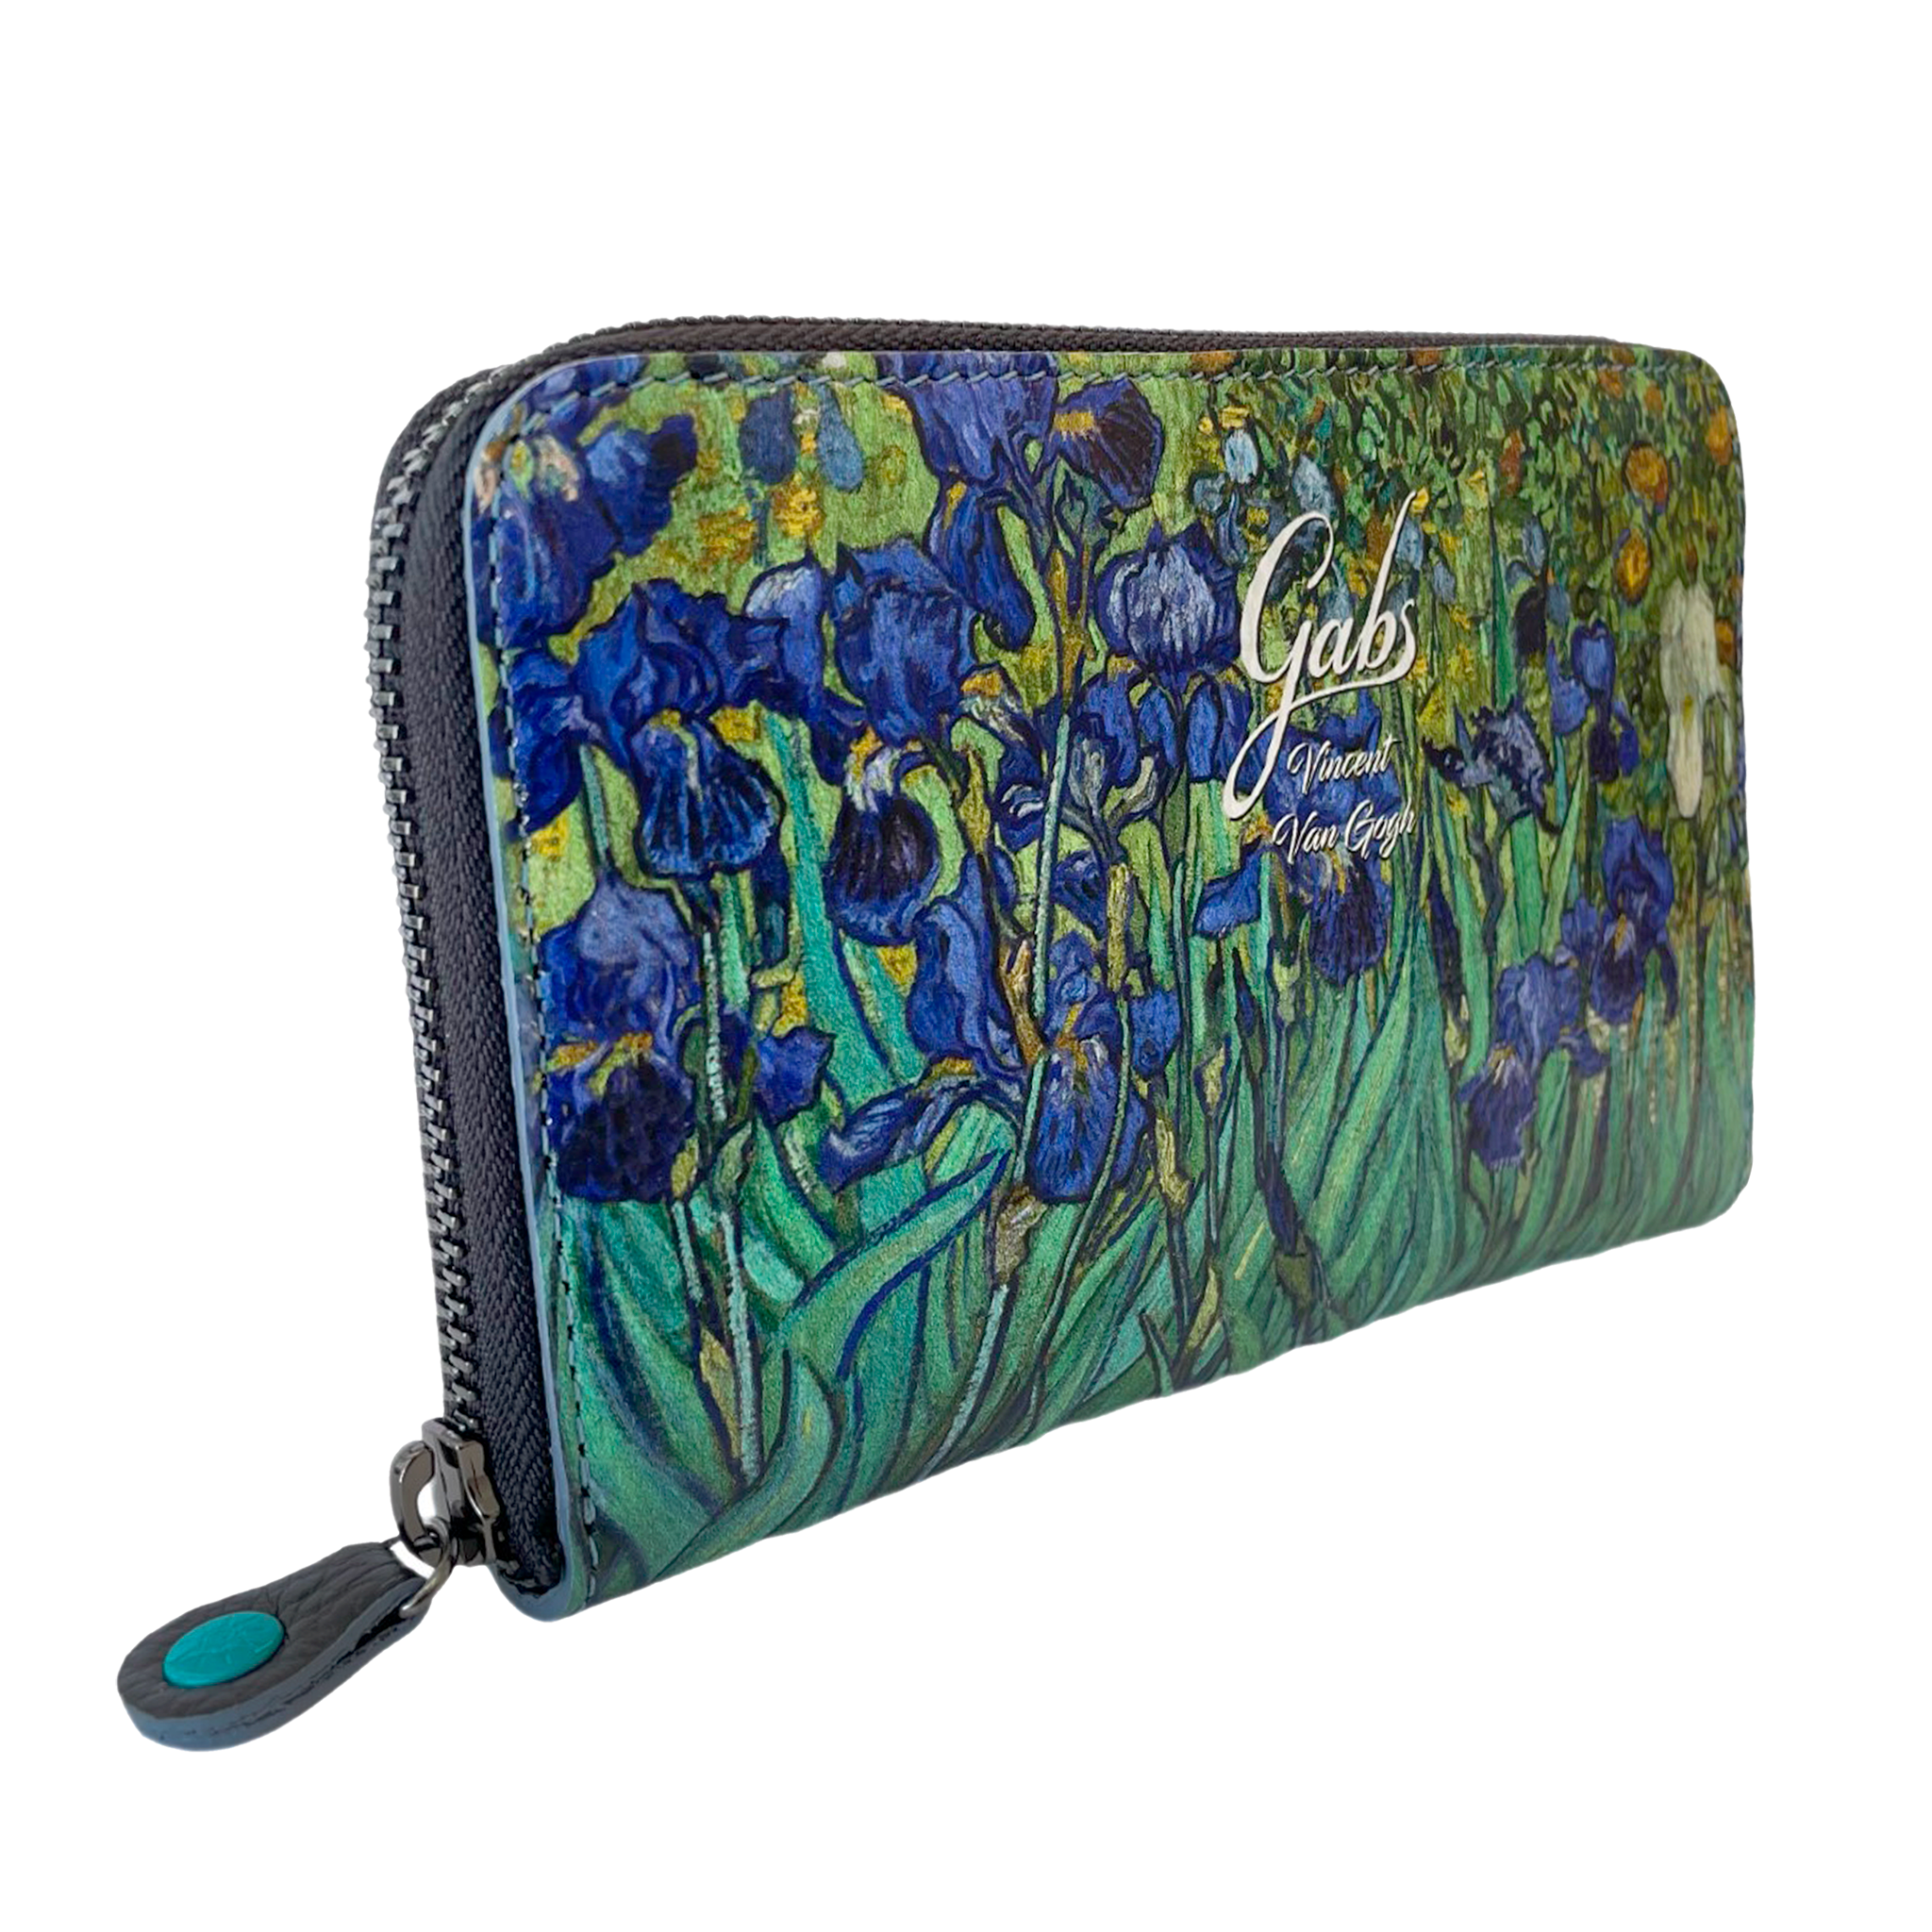 Wallet featuring Van Gogh's - Irises by Gabs Italy - Getty Museum Store